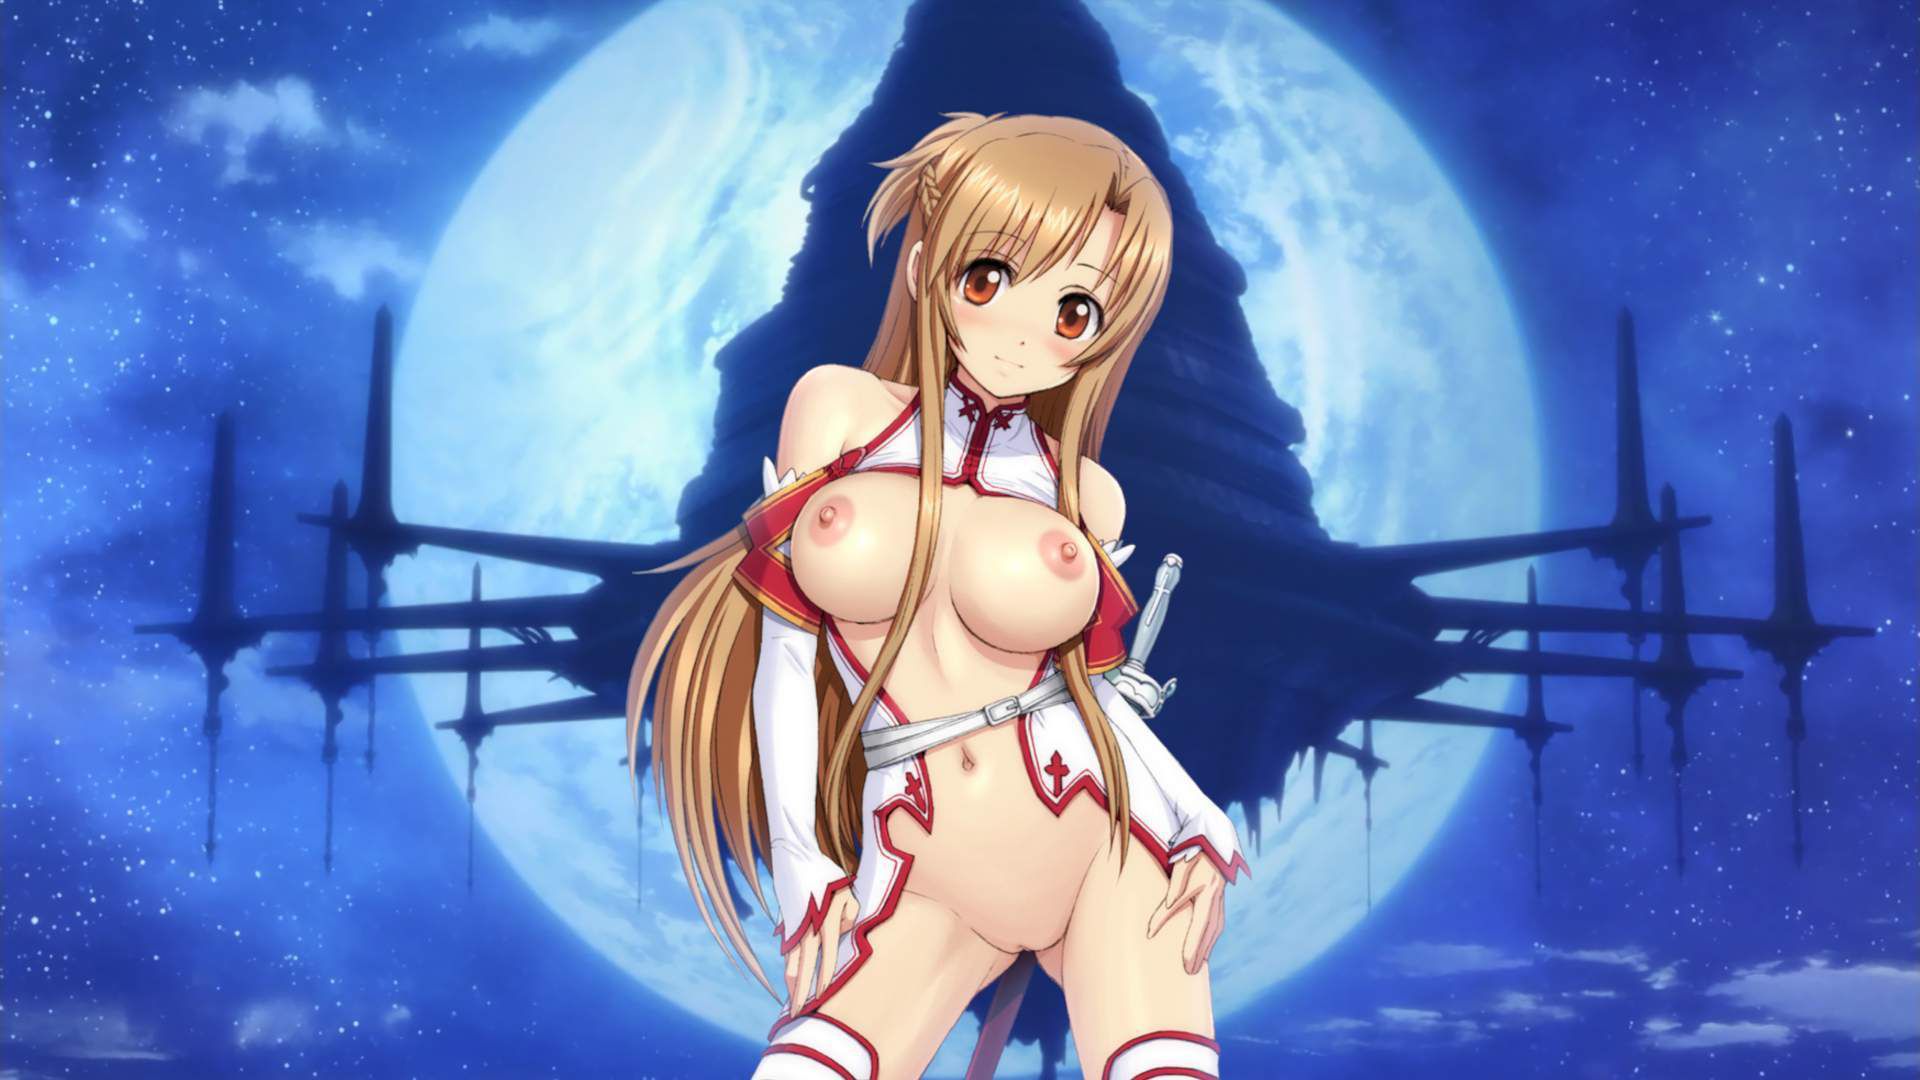 [Sword Art Online (SAO)] Erotic images such as Asuna-chan 74th 21